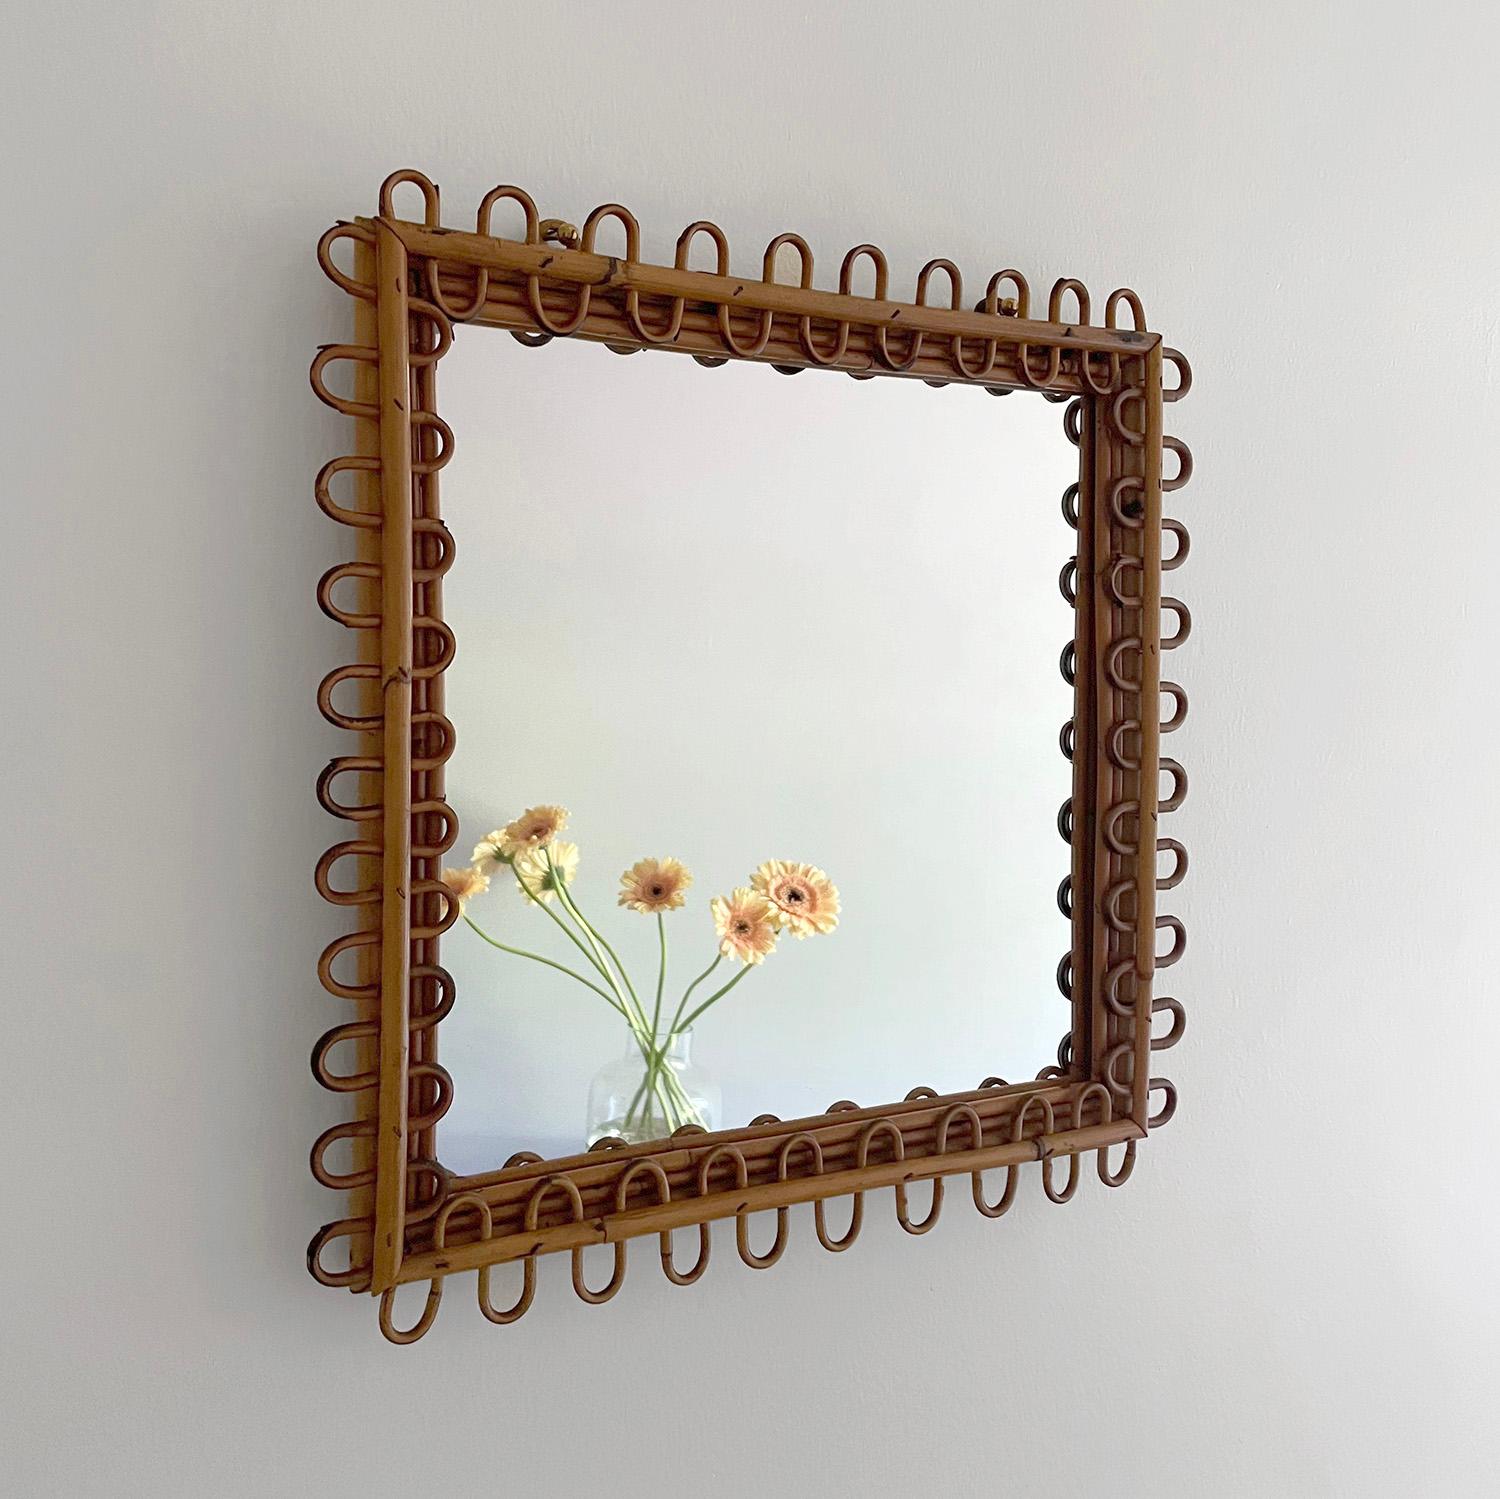 Italian rattan square wall mirror
Italy, circa 1950’s
Whimsical looped rattan frame
Natural color variations throughout the rattan
Two rattan loops for wall mounting
Original mirror light surface markings
Patina from age use